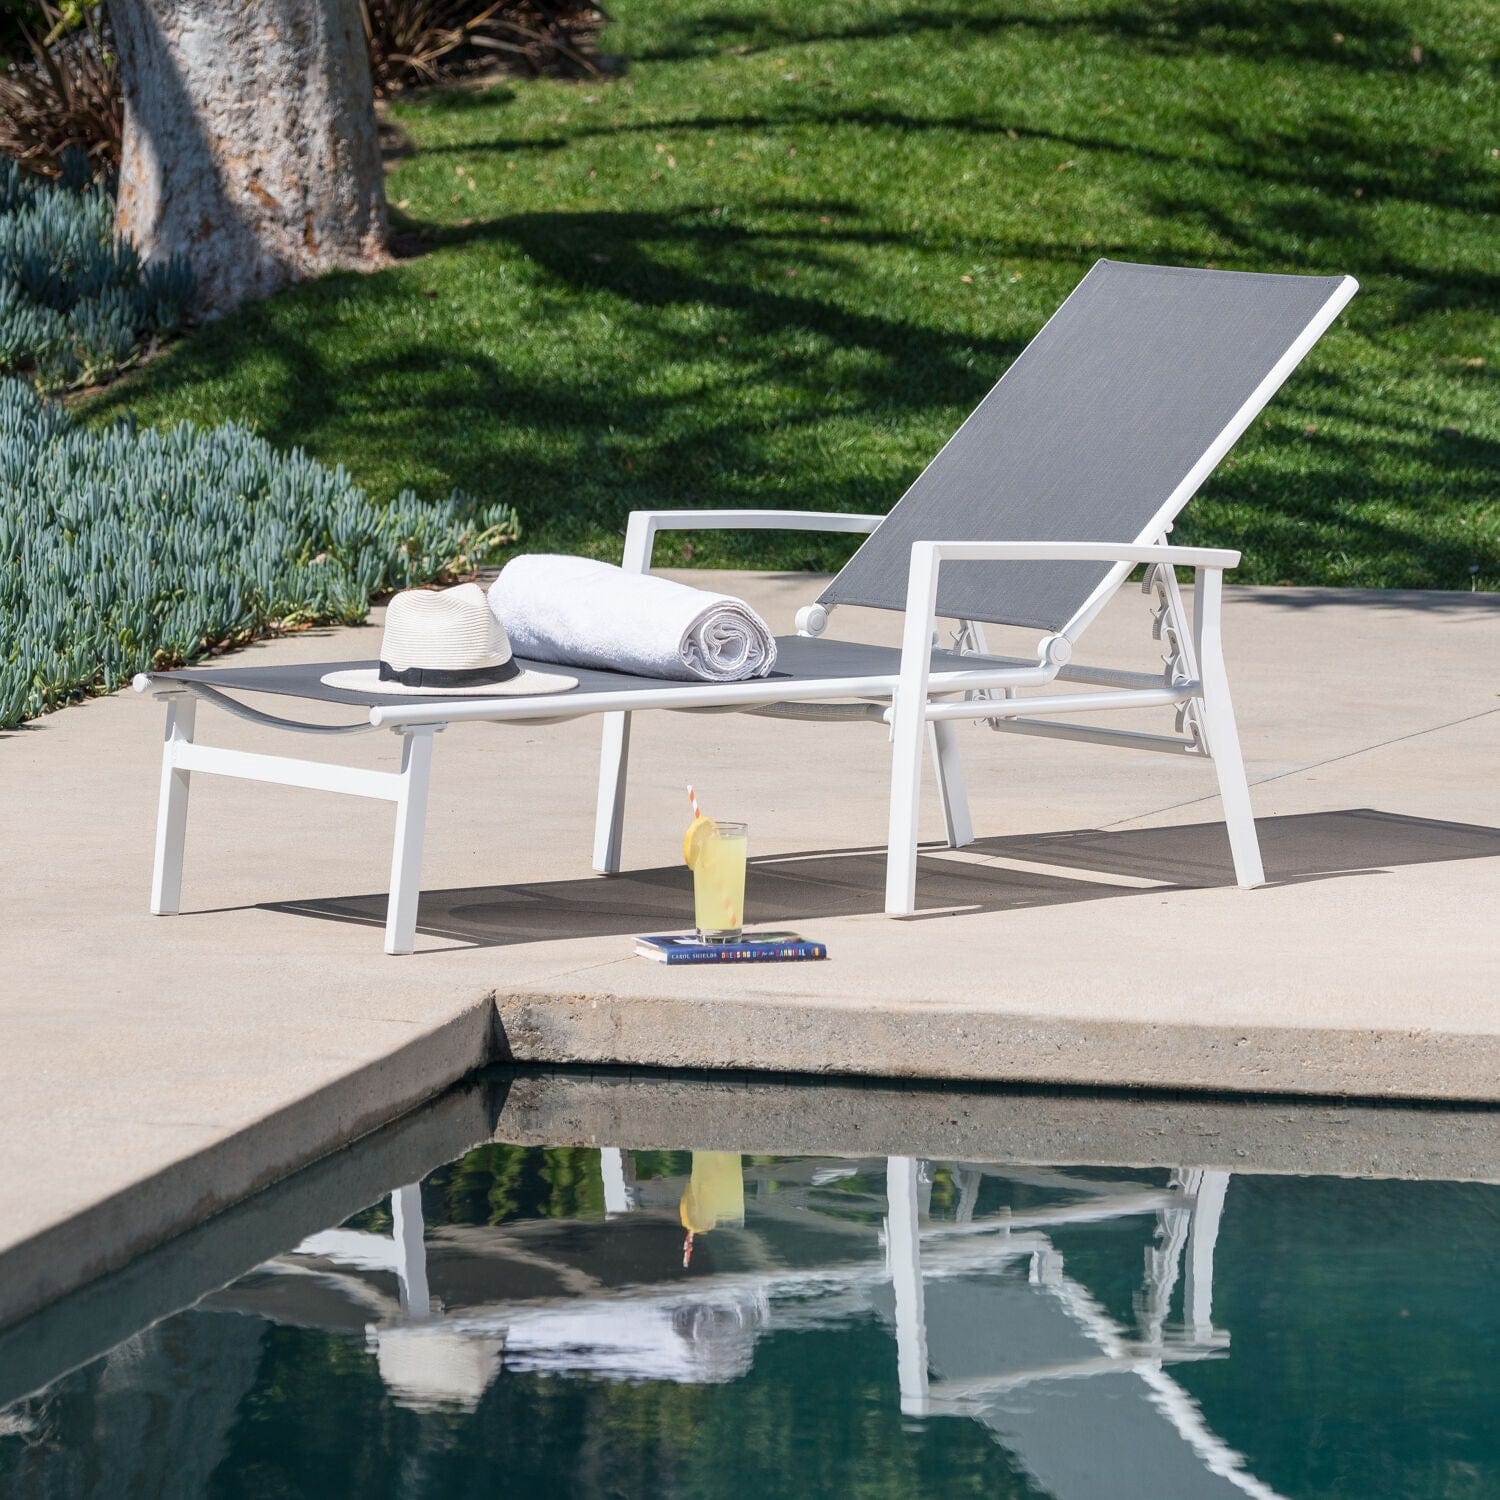 Hanover Fire Pit Chat Set Hanover- Naples 3-Piece Chaise Lounge Set featuring a 40,000 BTU Tile-Top Fire Pit Table with Burner Cover, White Frame / Gray Sling | 30x30 | NAPCHS3PCFP-WG